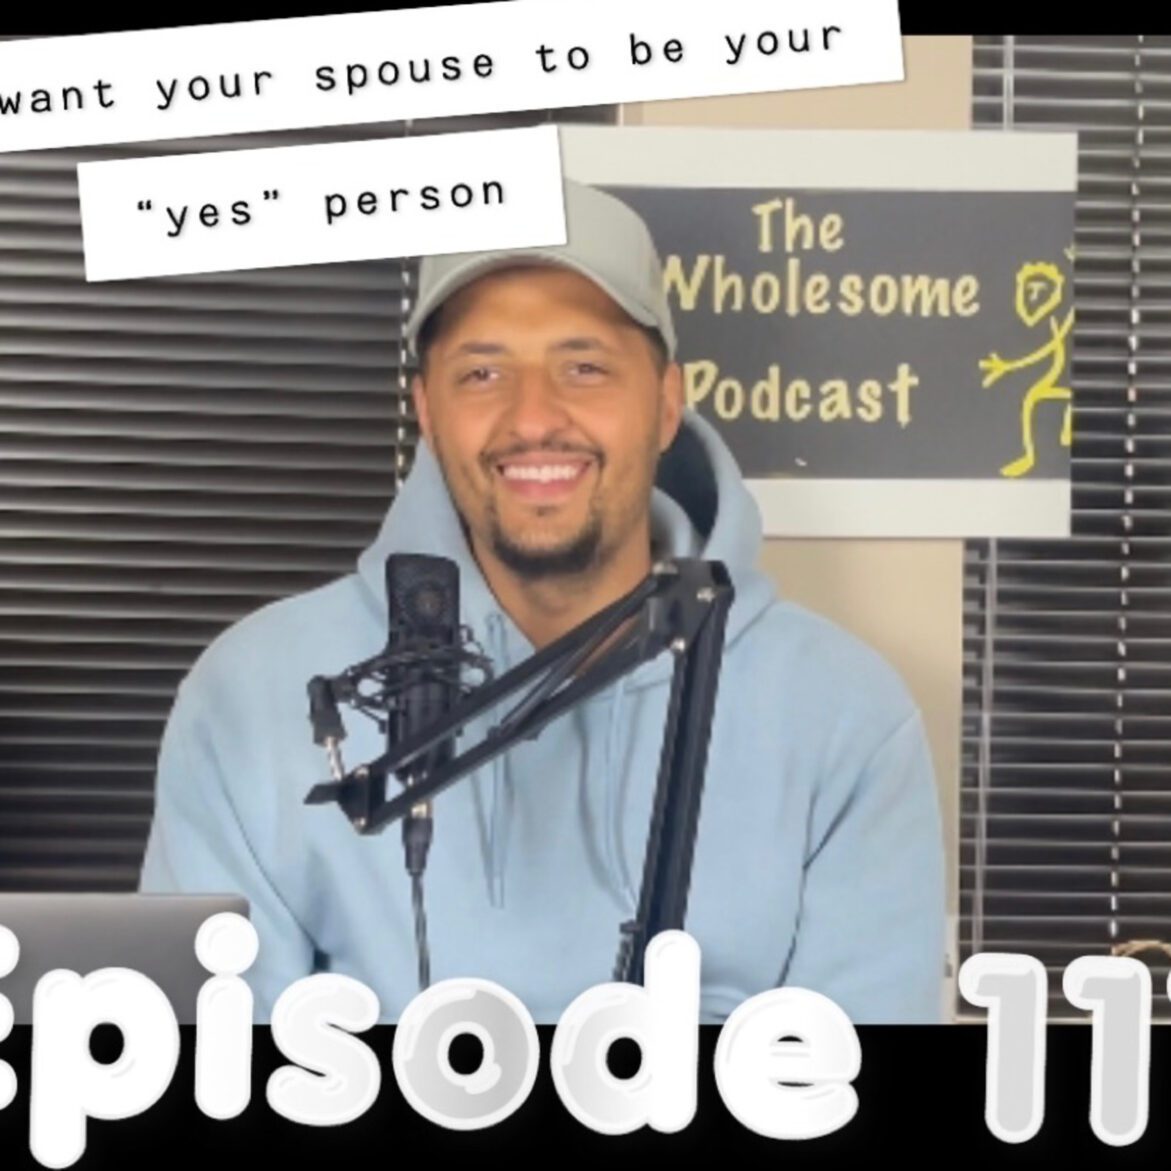 Black Podcasting - Episode 111| Do you want your spouse to be your 'yes' person?